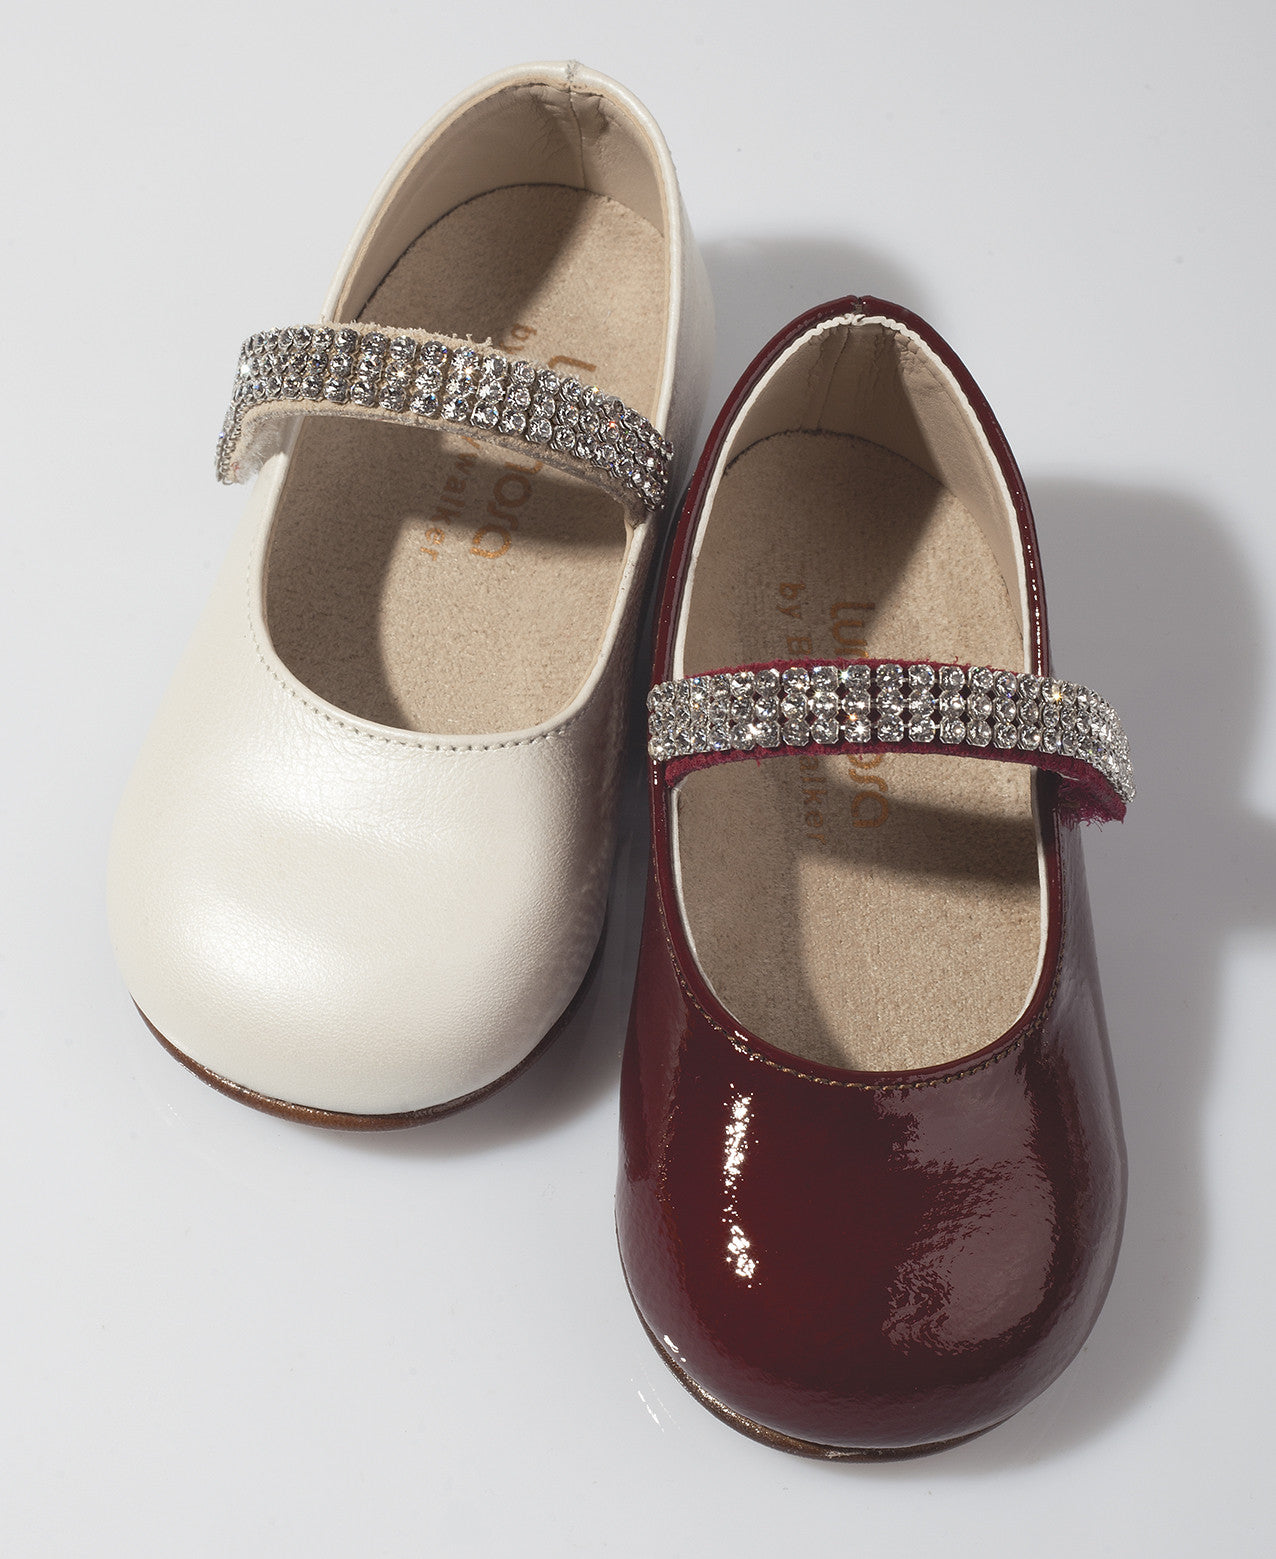 Girls Dark Red Leather Shoes With White Diamond Trims - CÉMAROSE | Children's Fashion Store - 2